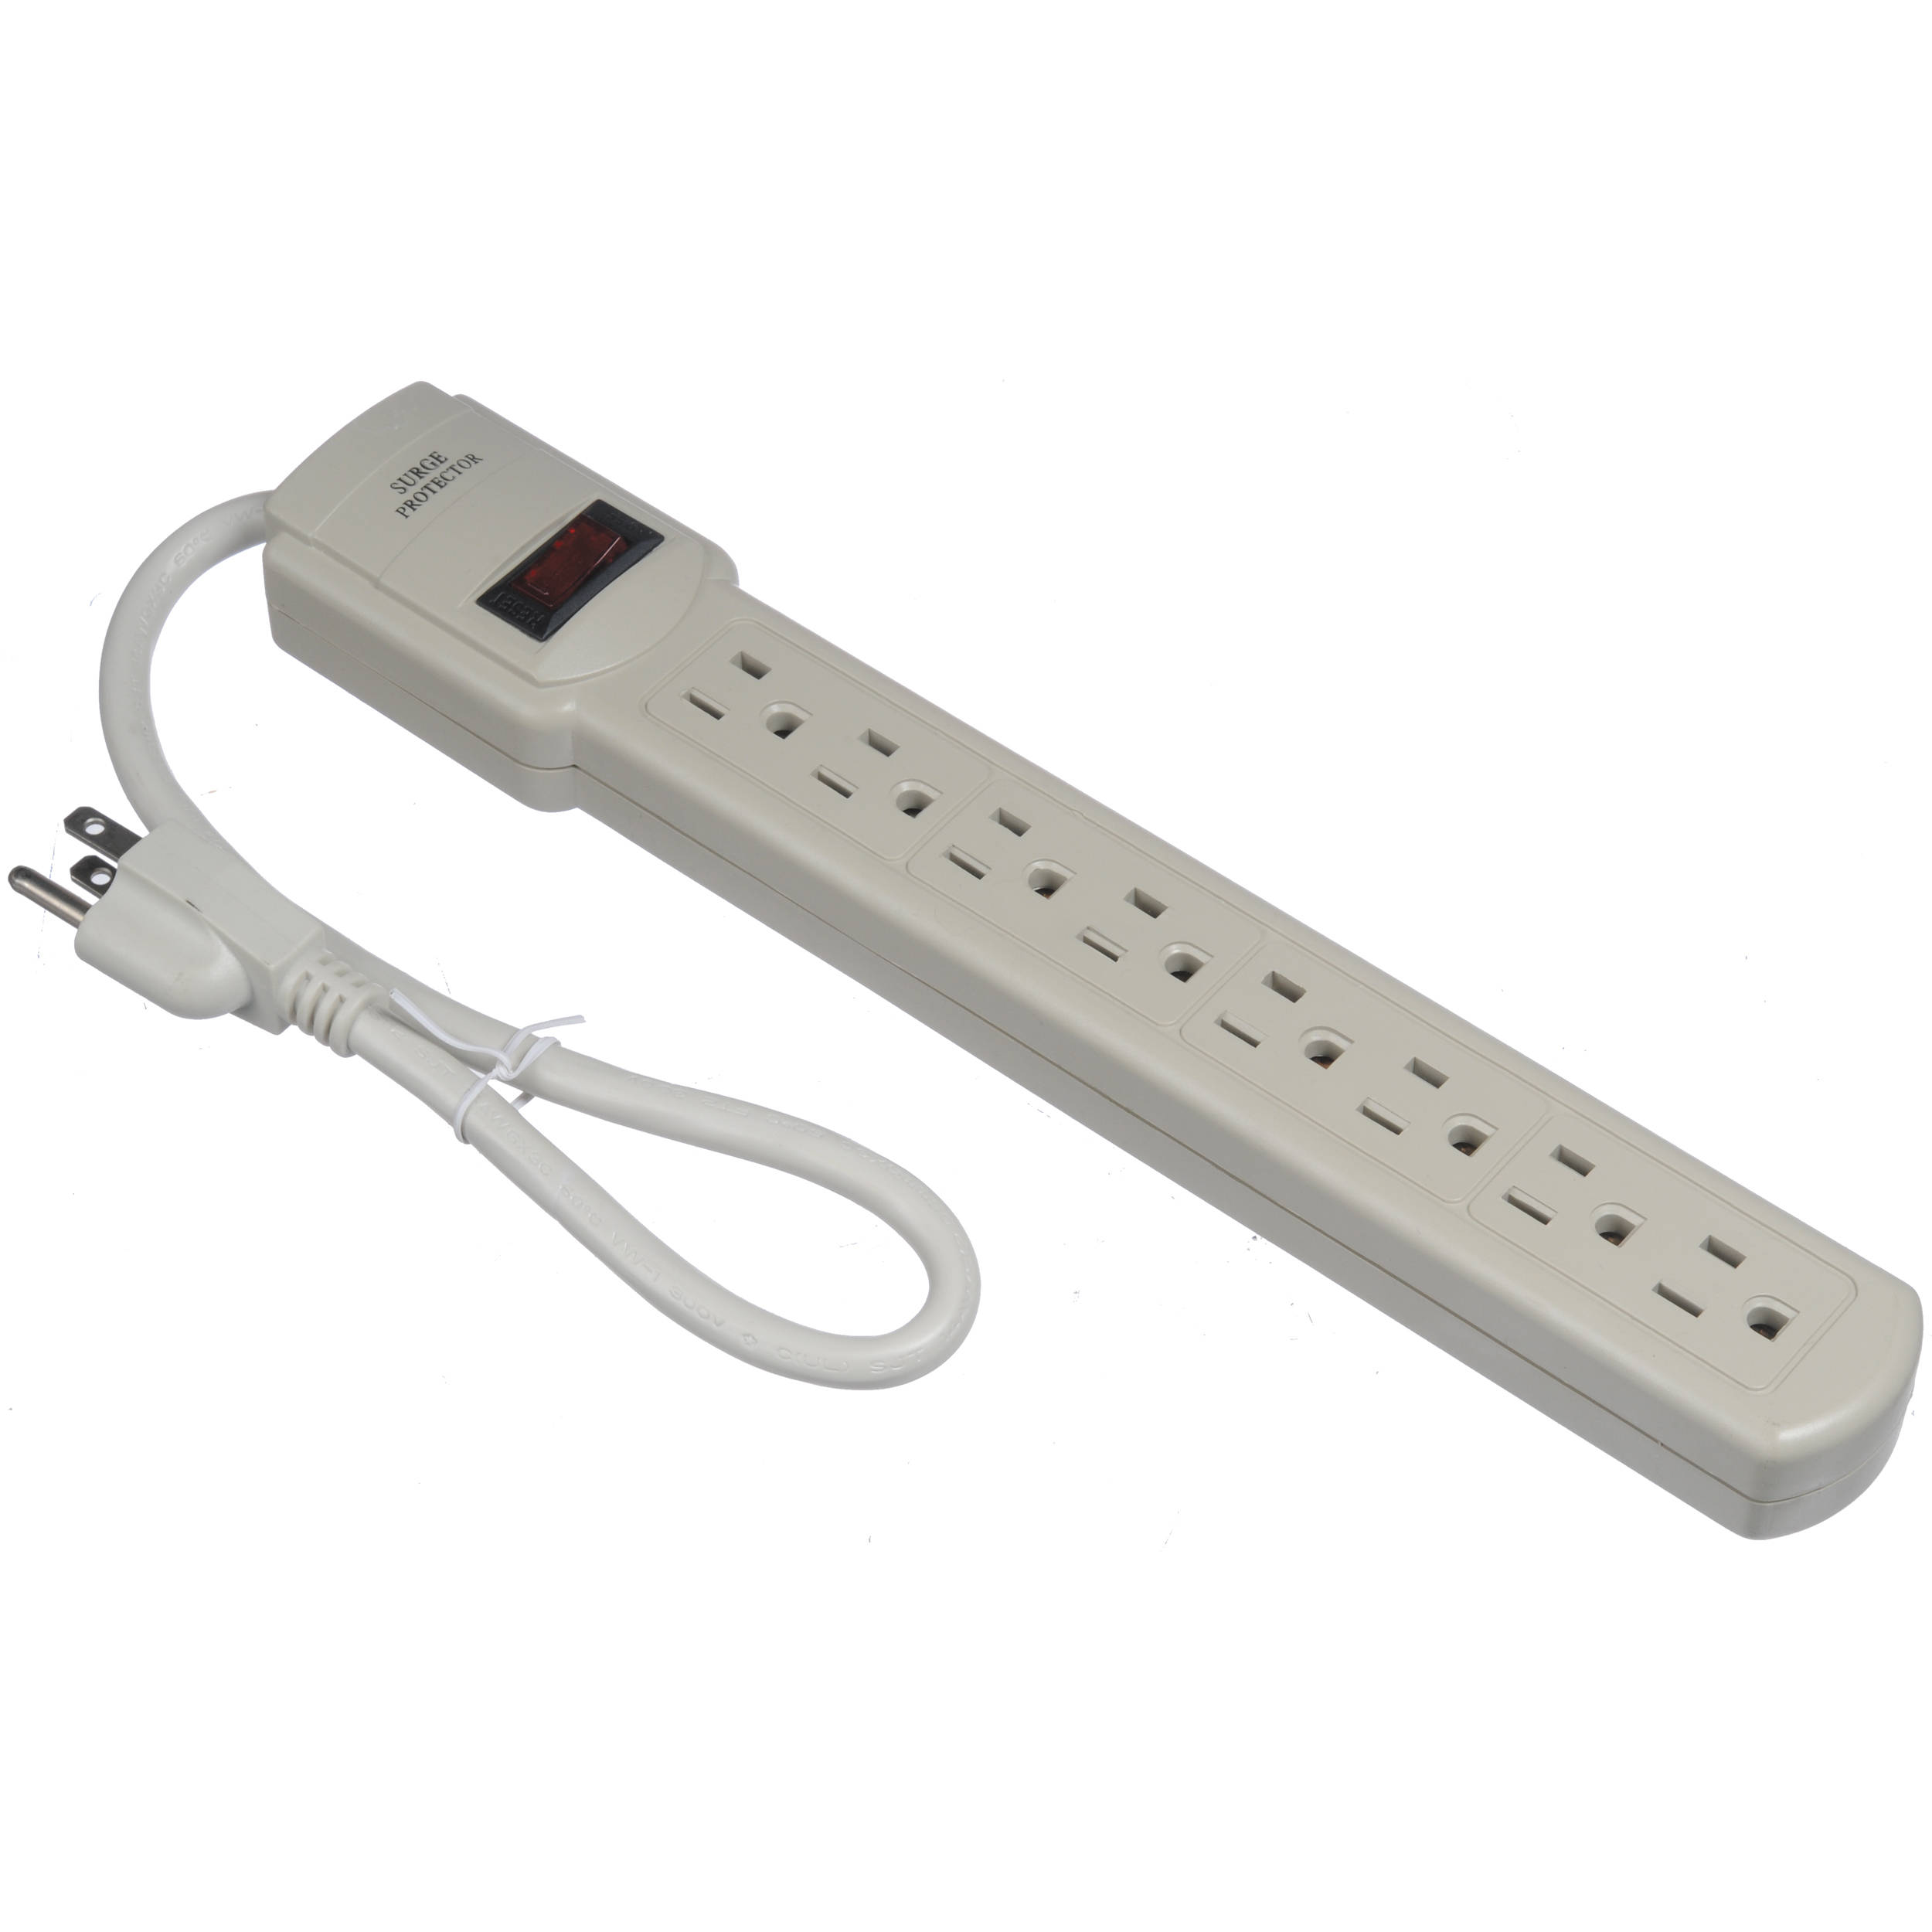 11 Best Outlet Strips With Surge Protector for 2023